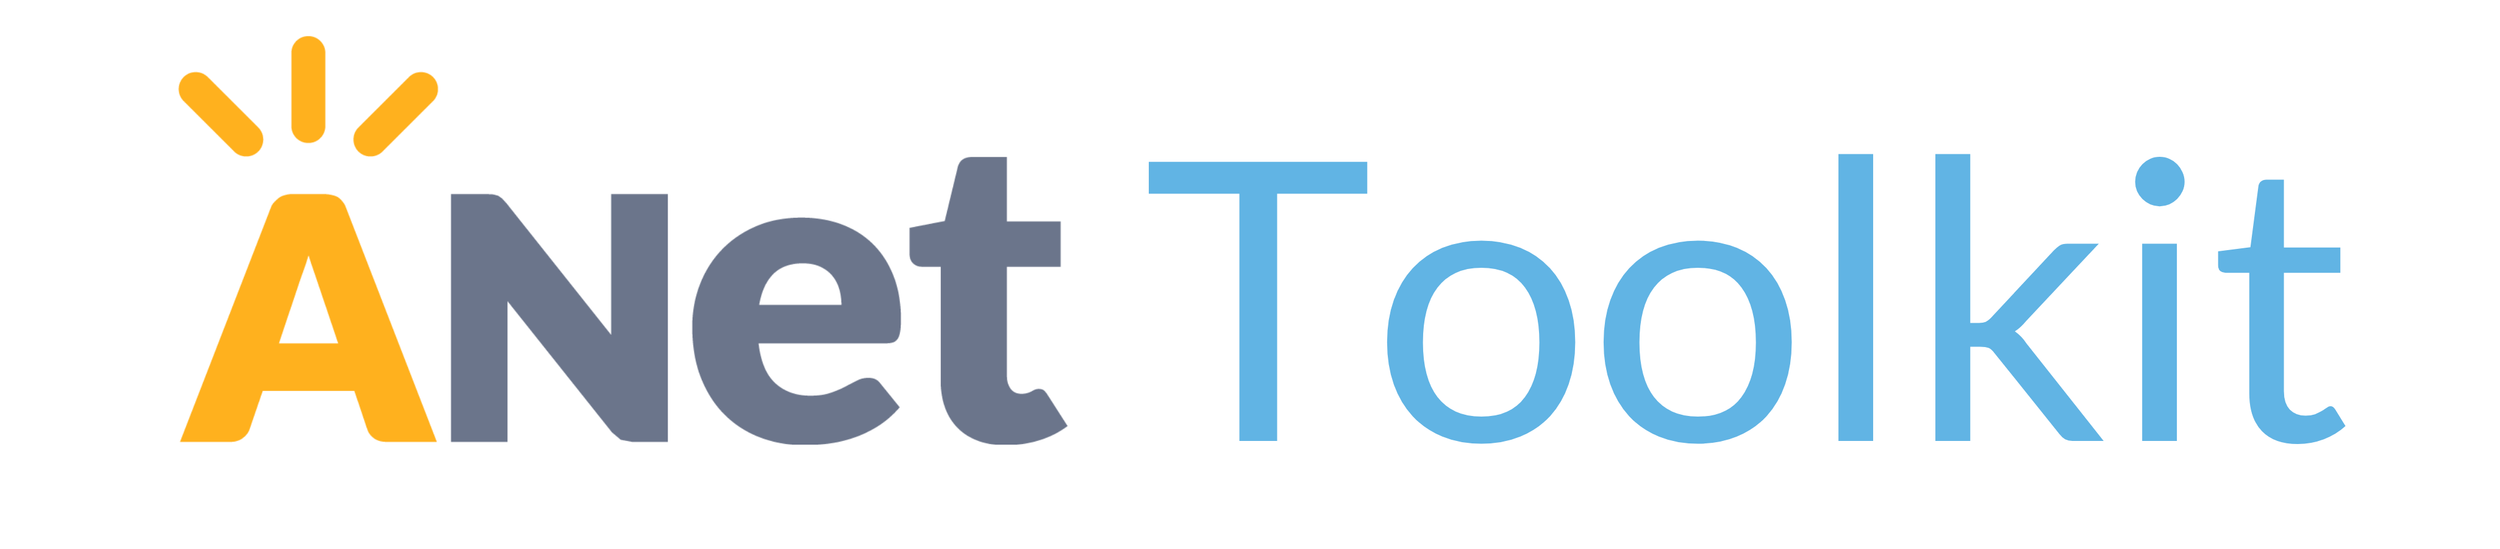 ANet Achievement Network Toolkit for teachers and educational leaders